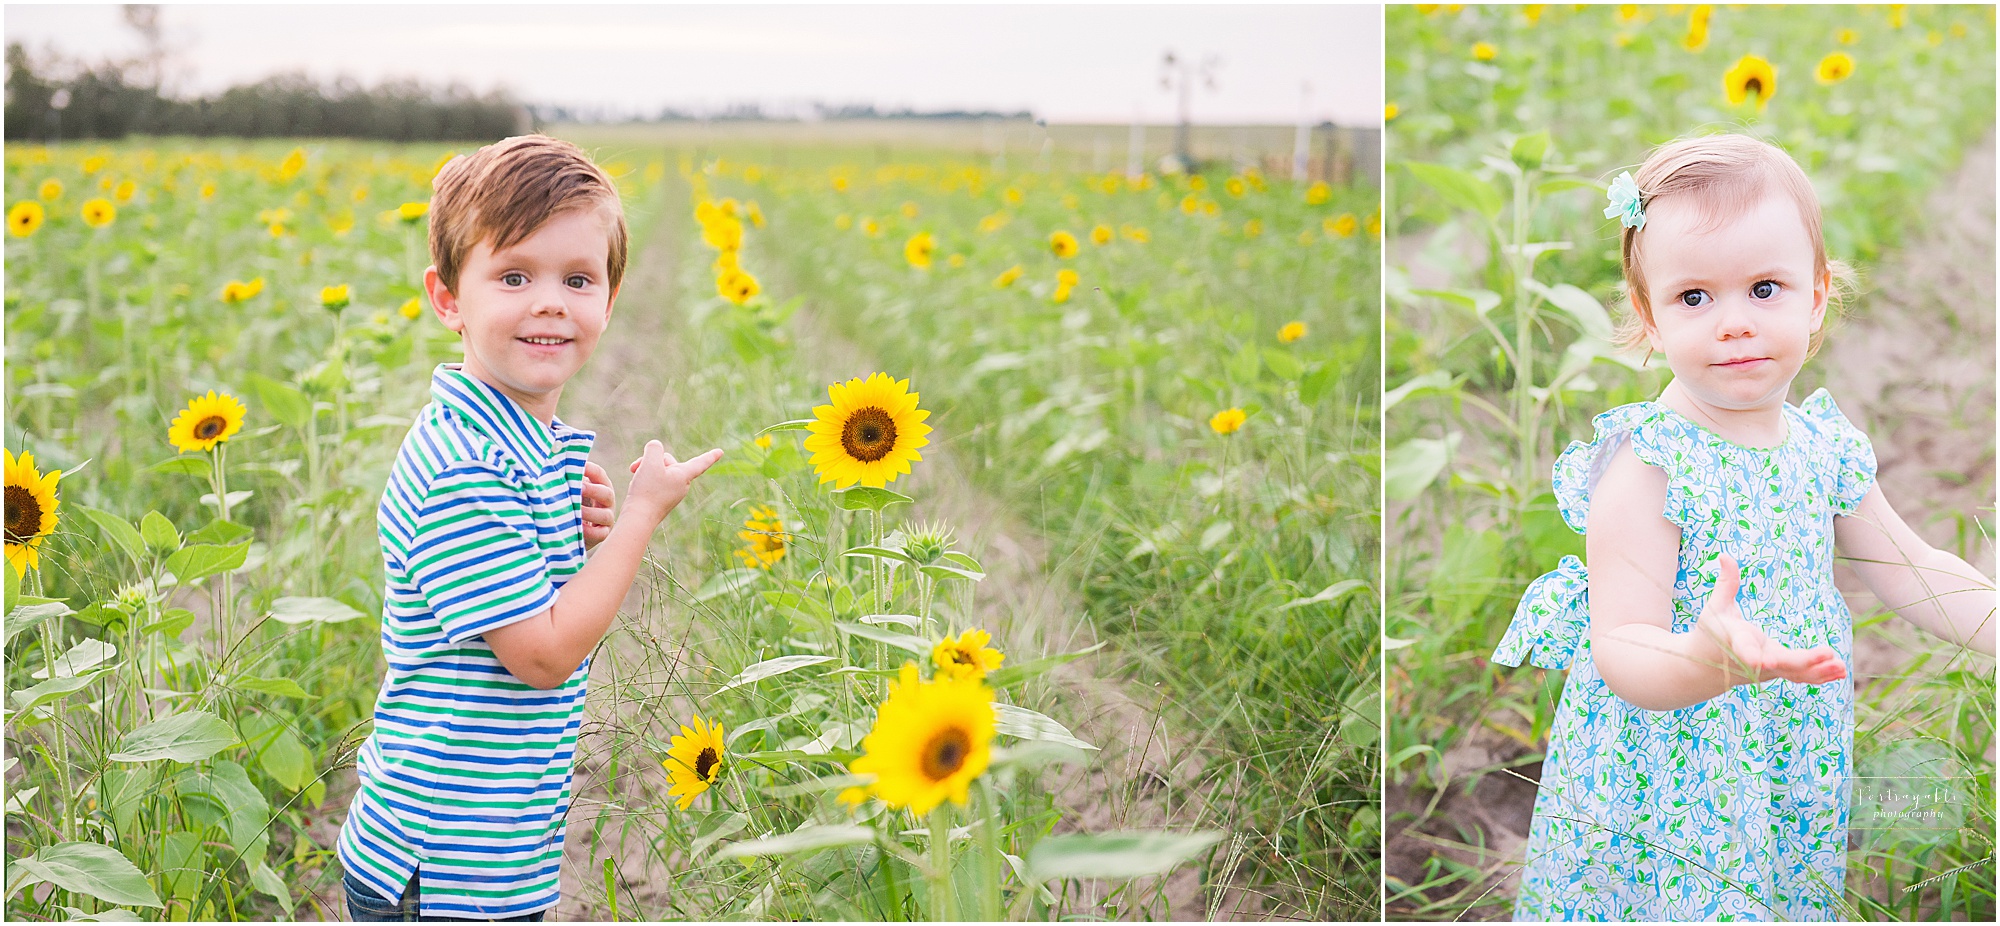 Southern-hill-farms-sunflower-photographer